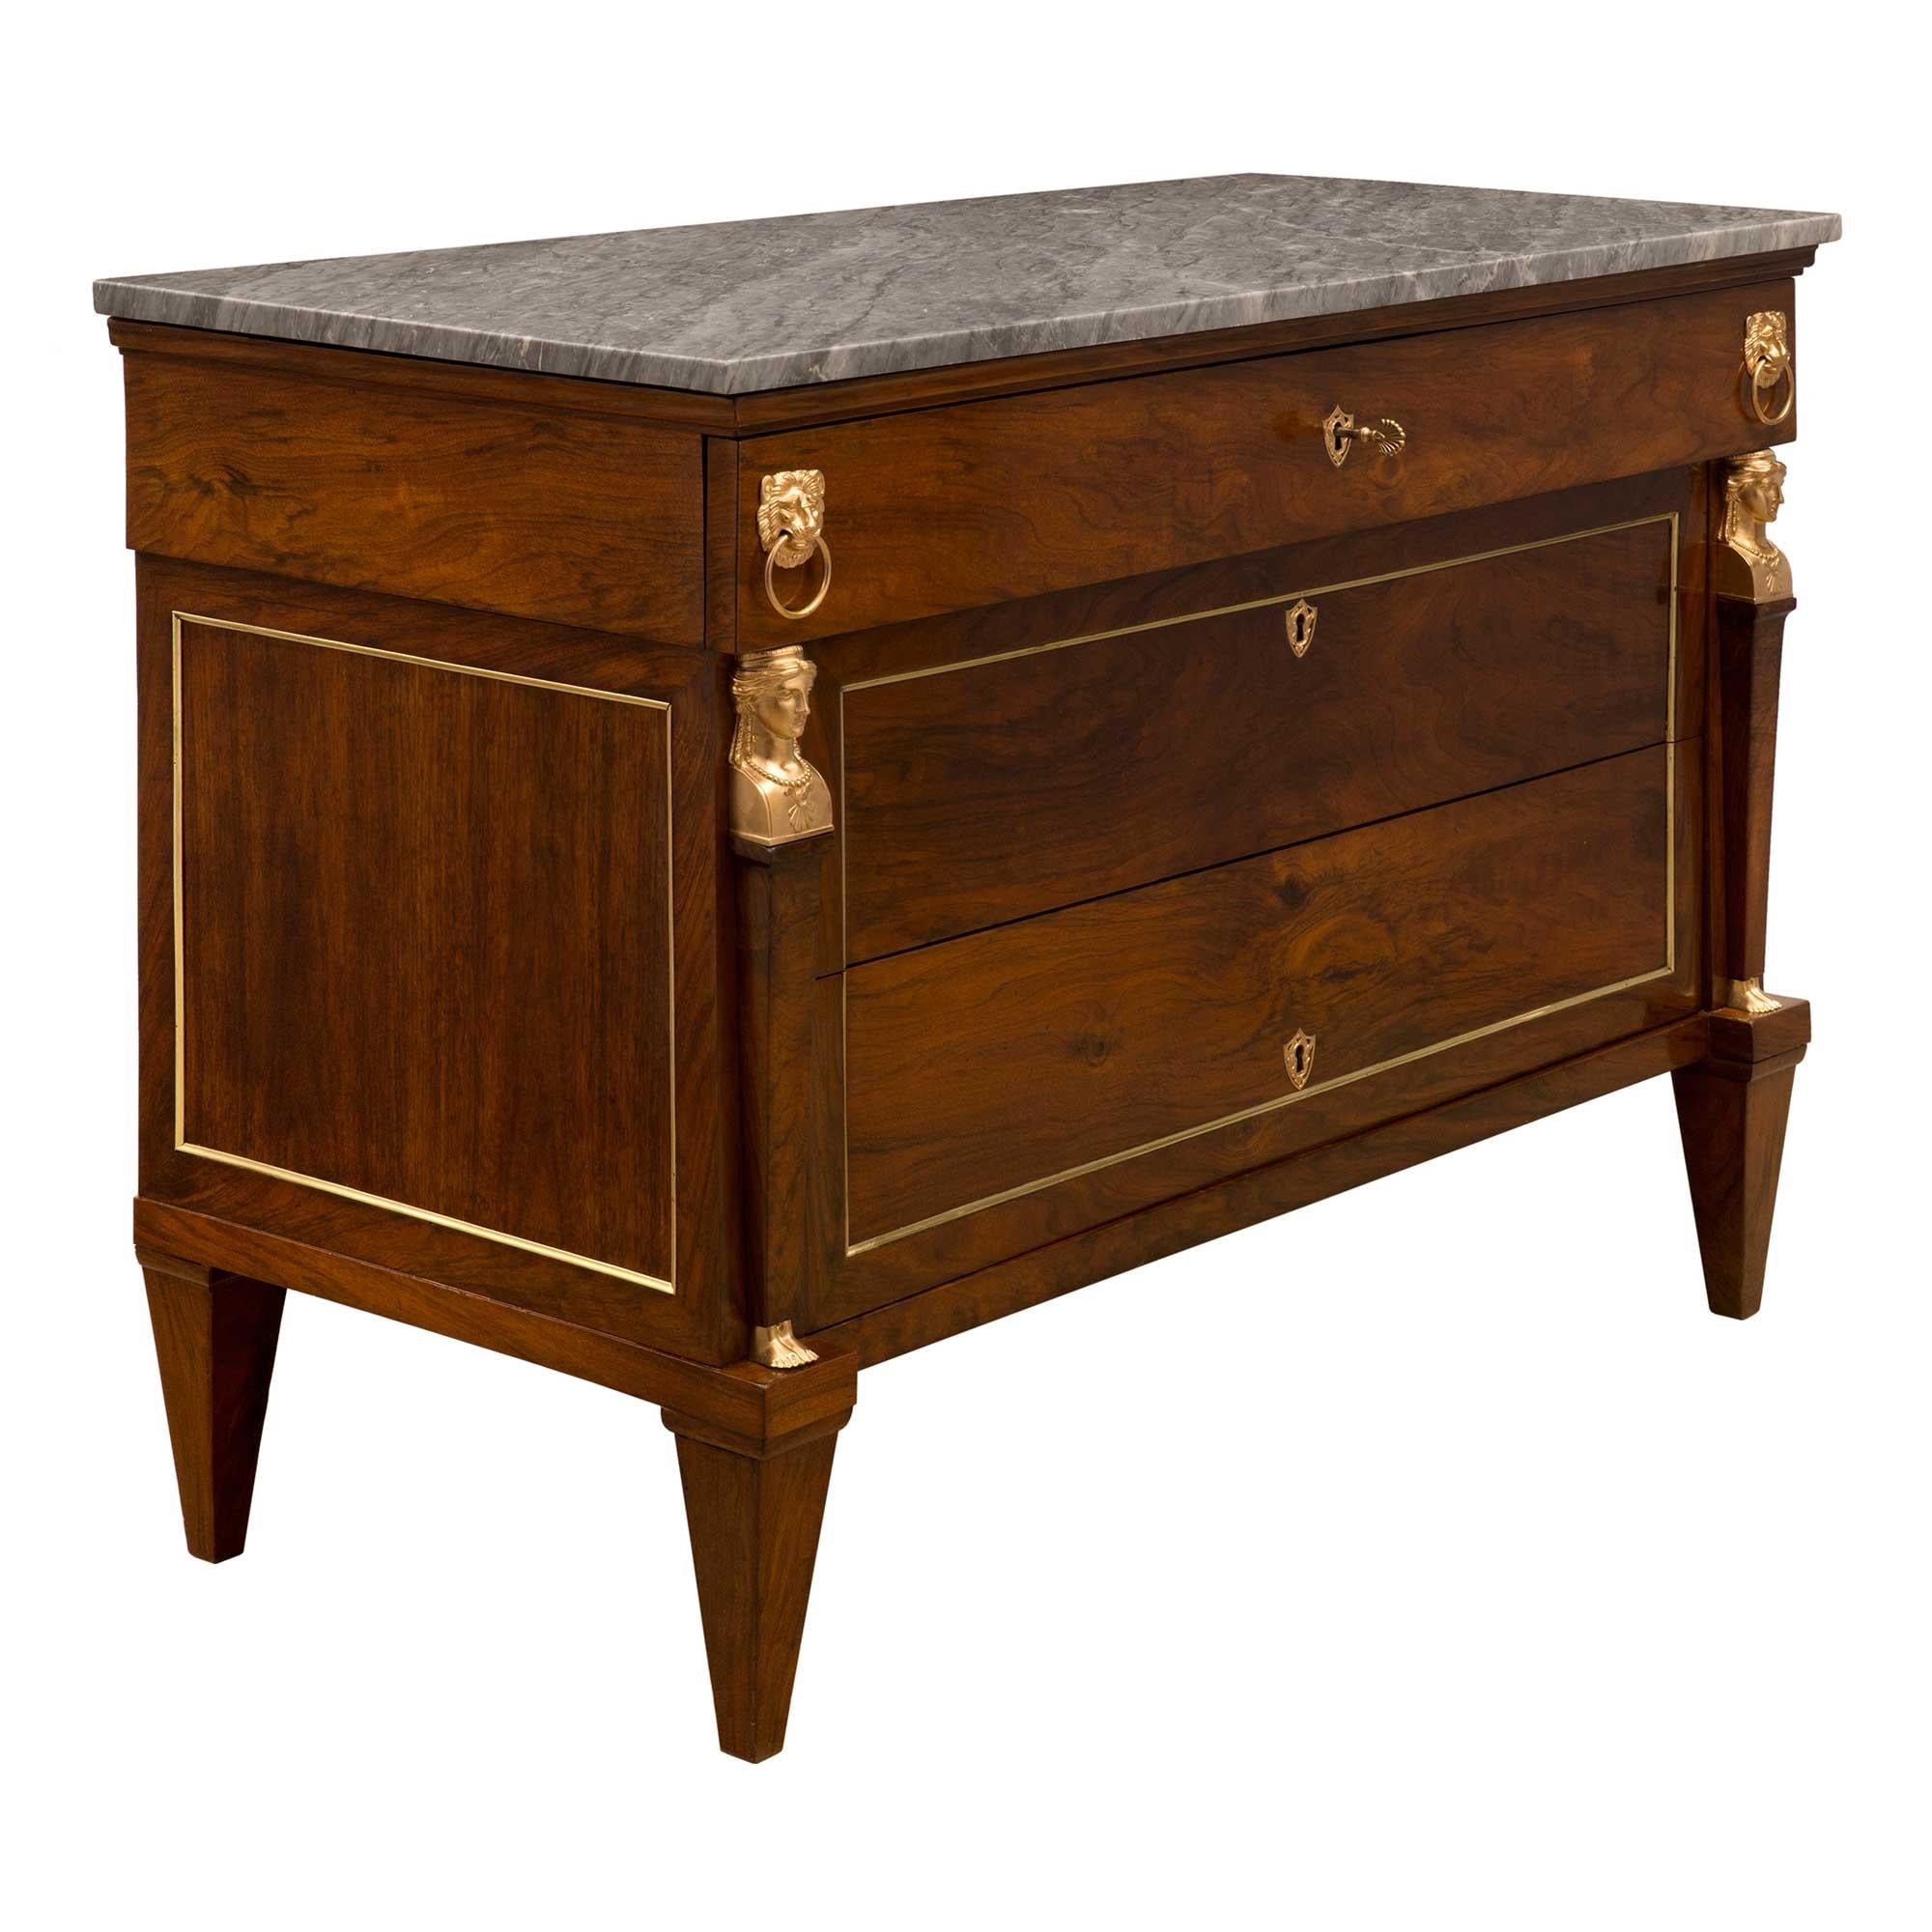 French Early 19th Century Empire St. Walnut, Ormolu and Marble Chests In Good Condition For Sale In West Palm Beach, FL